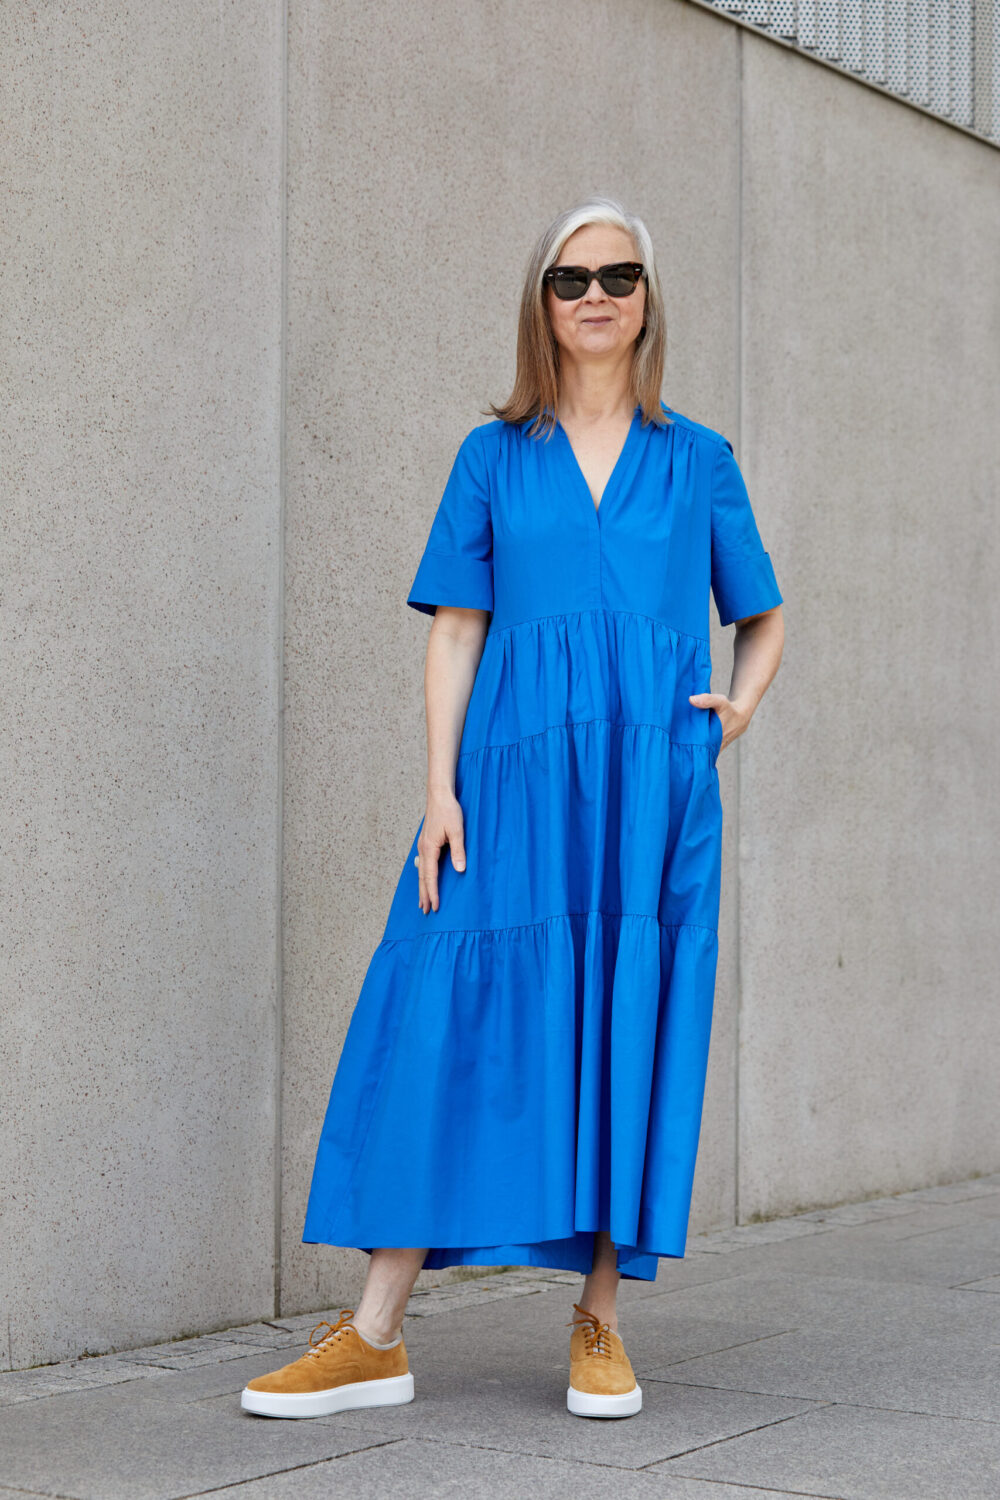 Easy breezy summer dresses (and how to wear them)